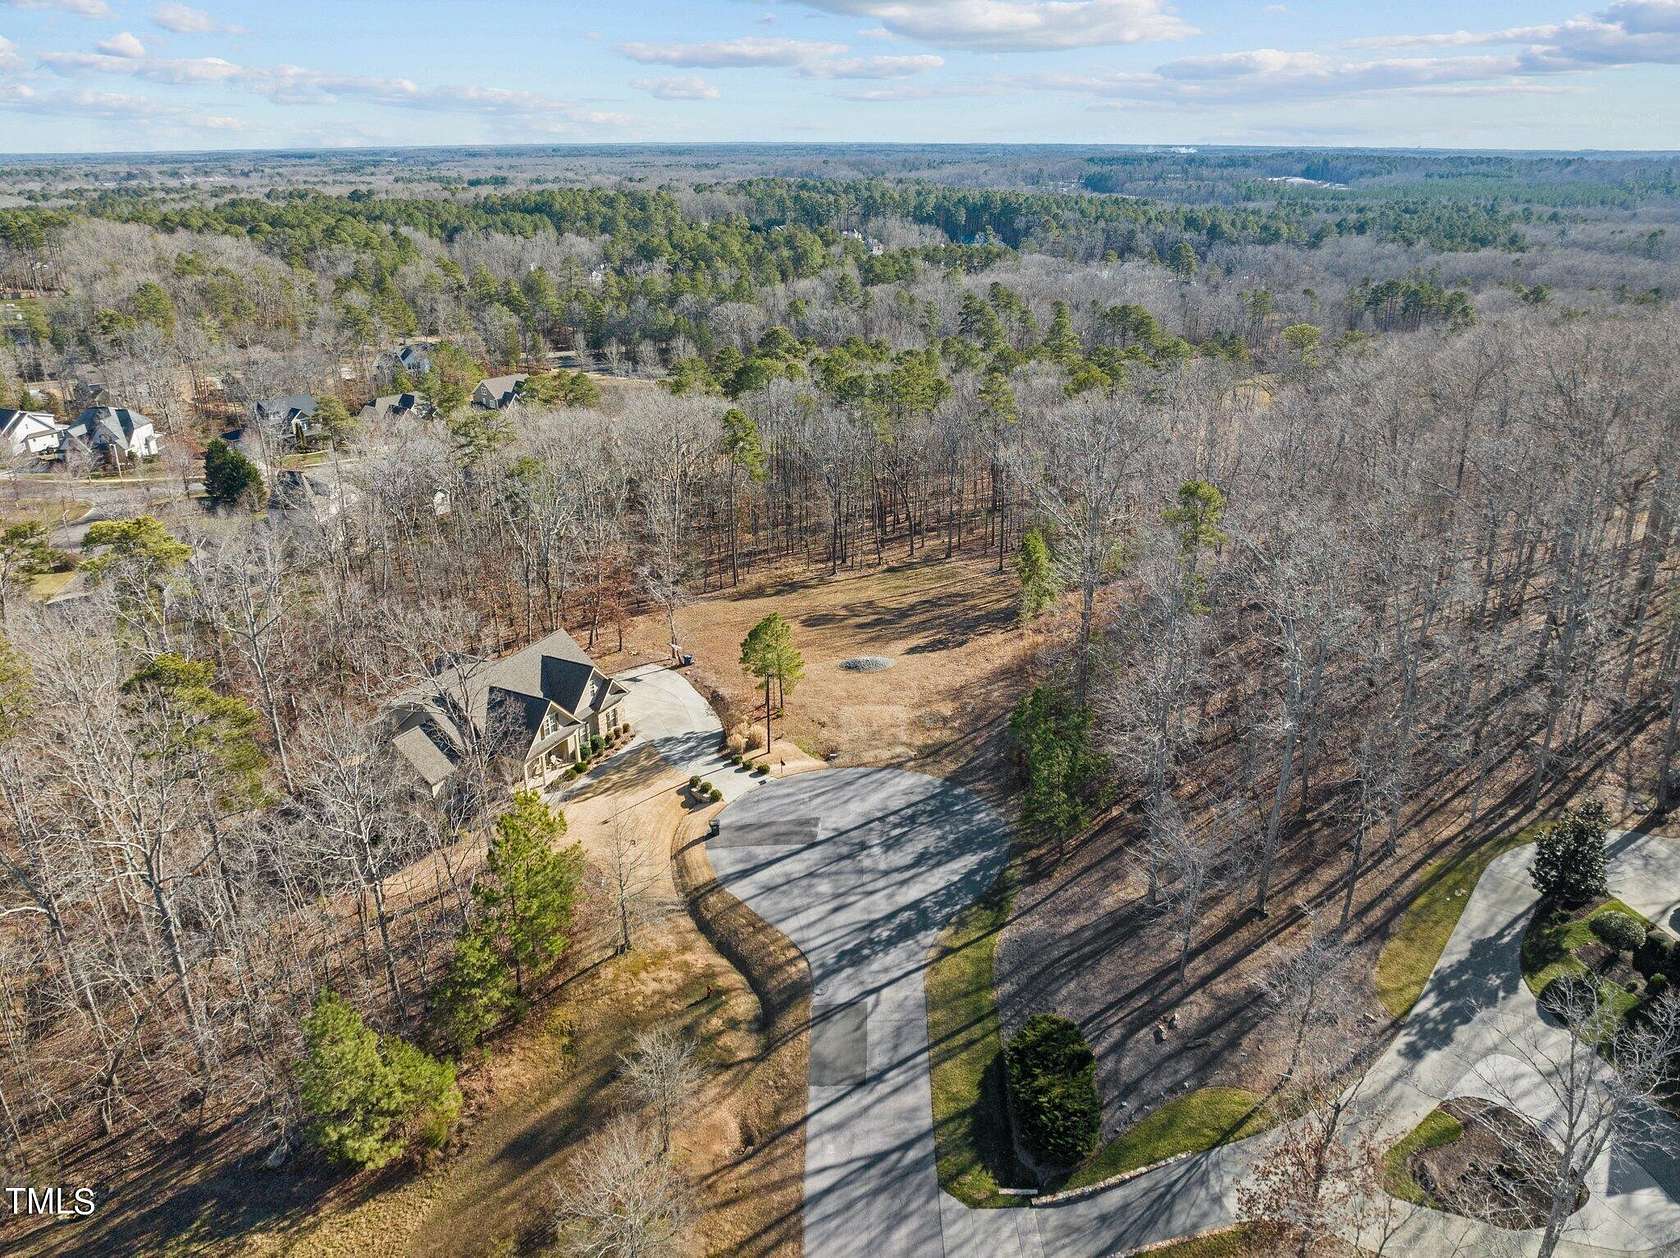 1.8 Acres of Residential Land for Sale in Durham, North Carolina